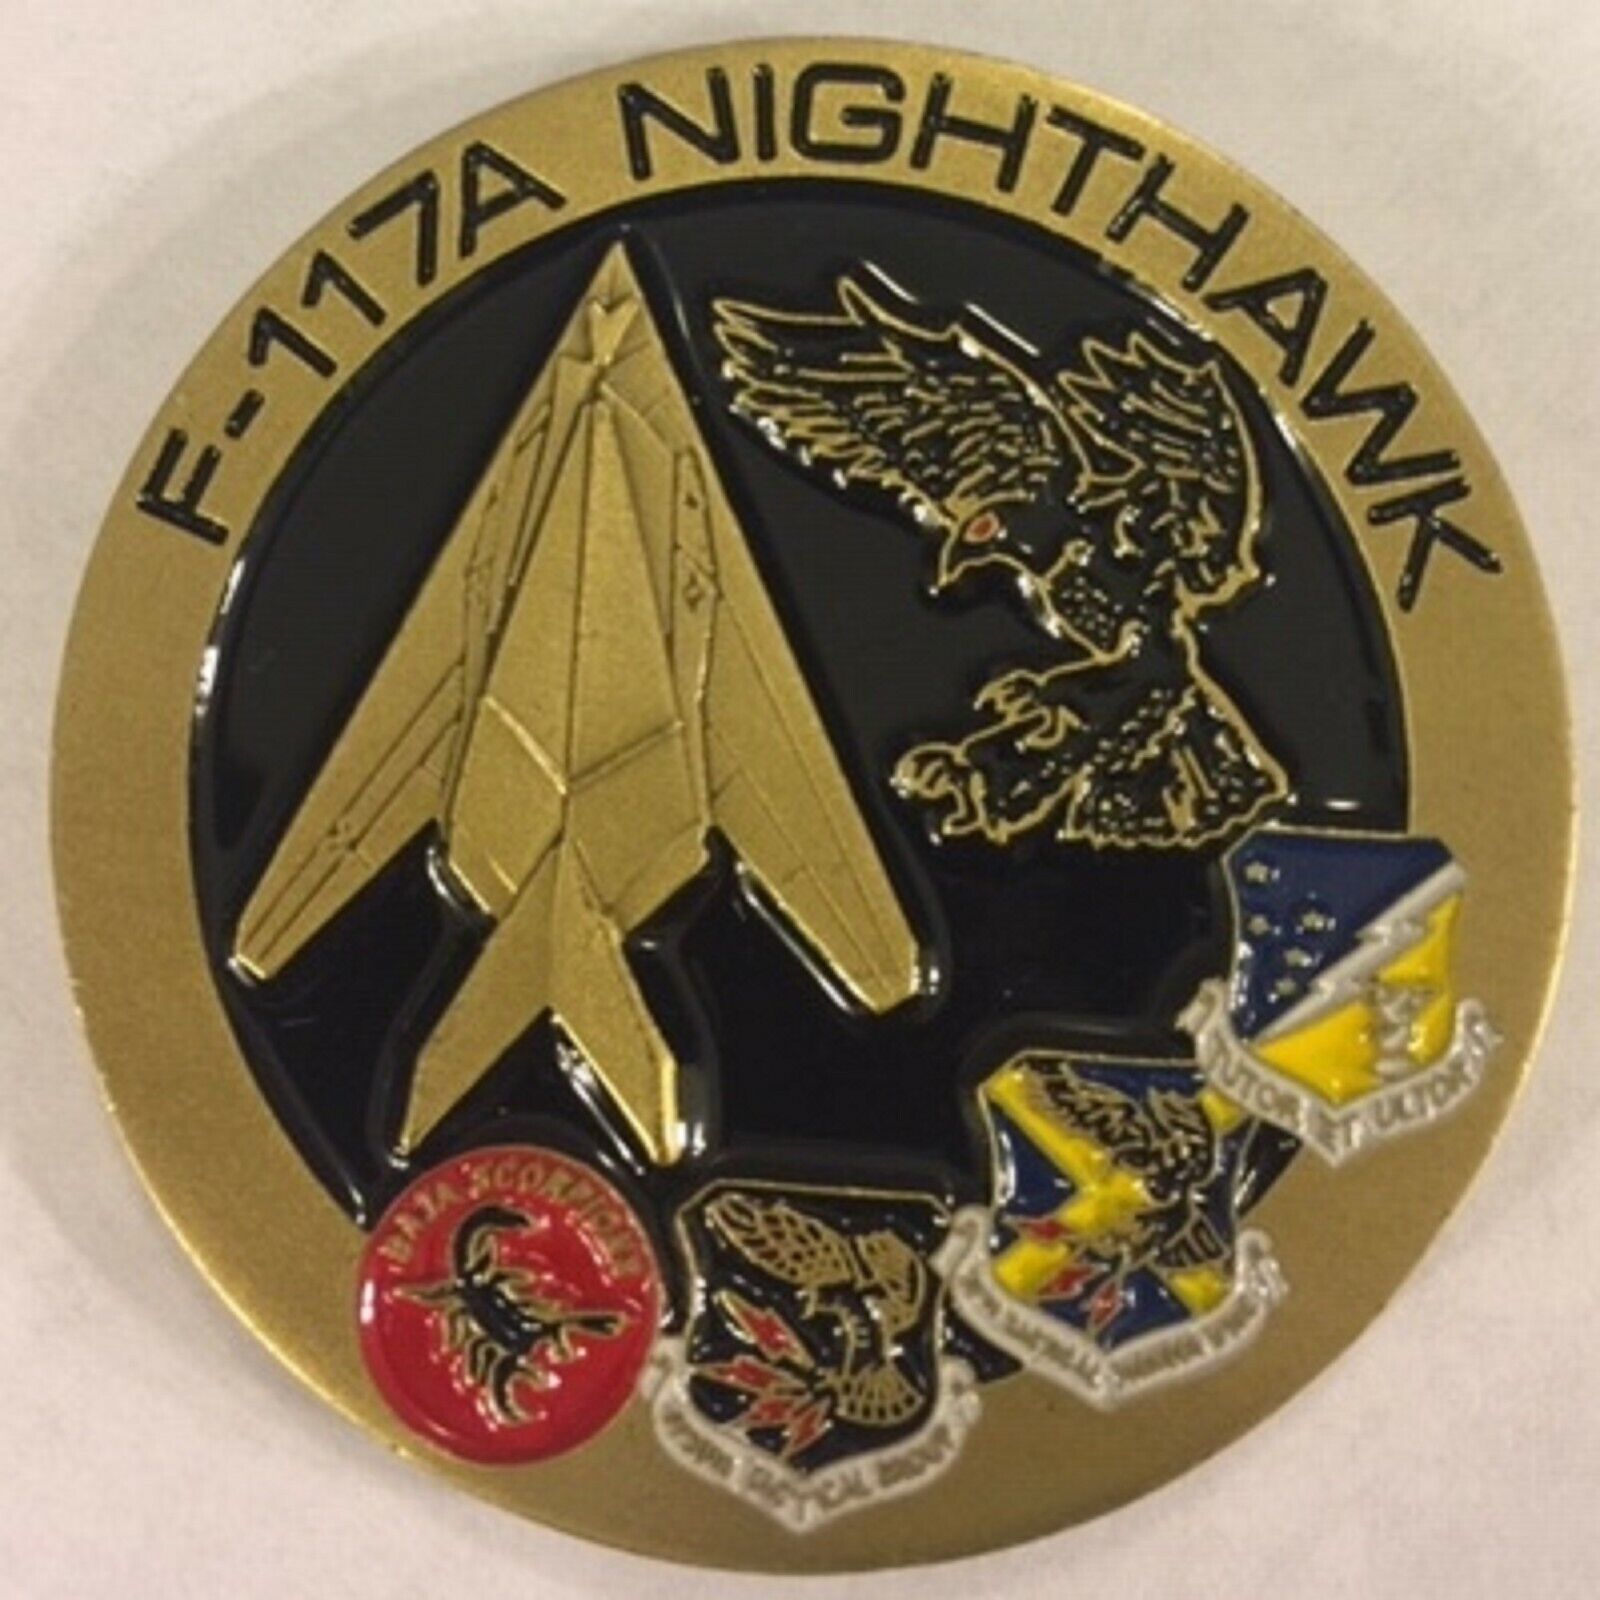 AIR FORCE V-117A NIGHTHAWK STEALTH FIGHTER CHALLENGE COIN 